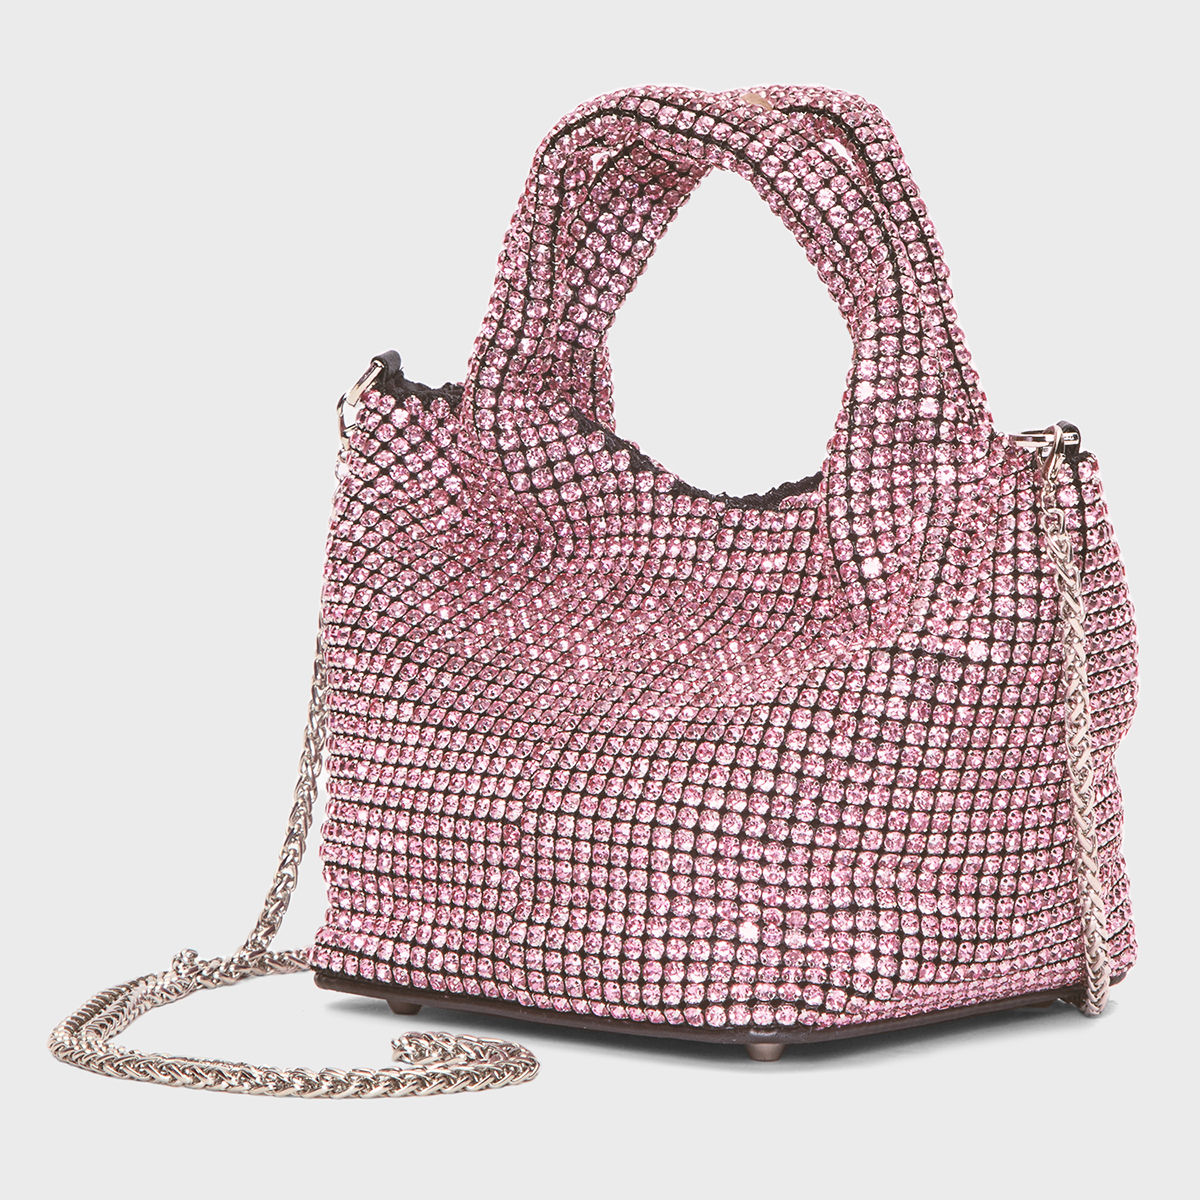 Buy RSVP by Nykaa Fashion Pink Embellished Small Handbag Online